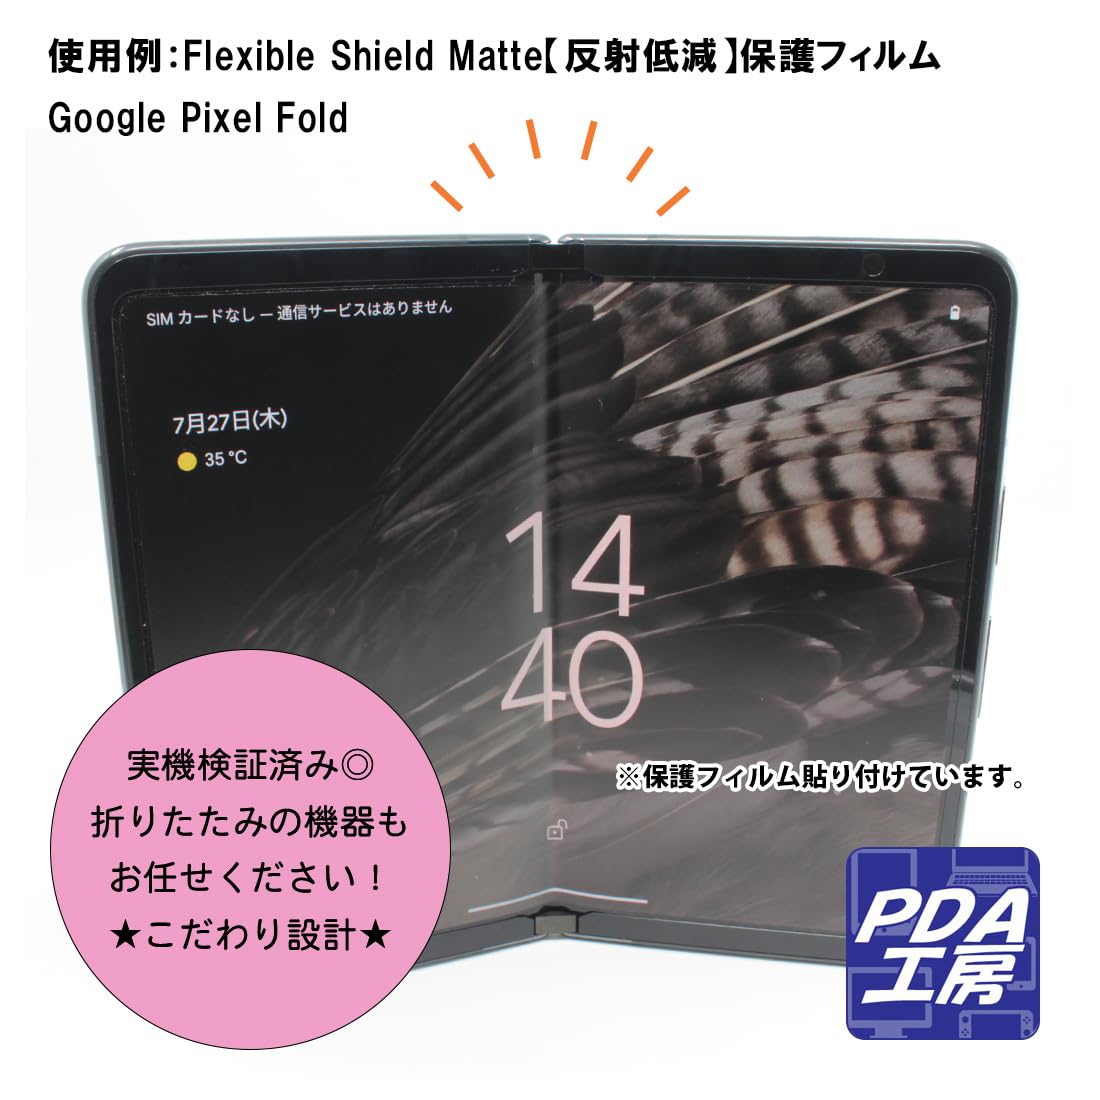 PDA atelier Google Pixel Fold correspondence Flexible Shield[ lustre ] protection film [ main screen for ] bending surface correspondence made in Japan 